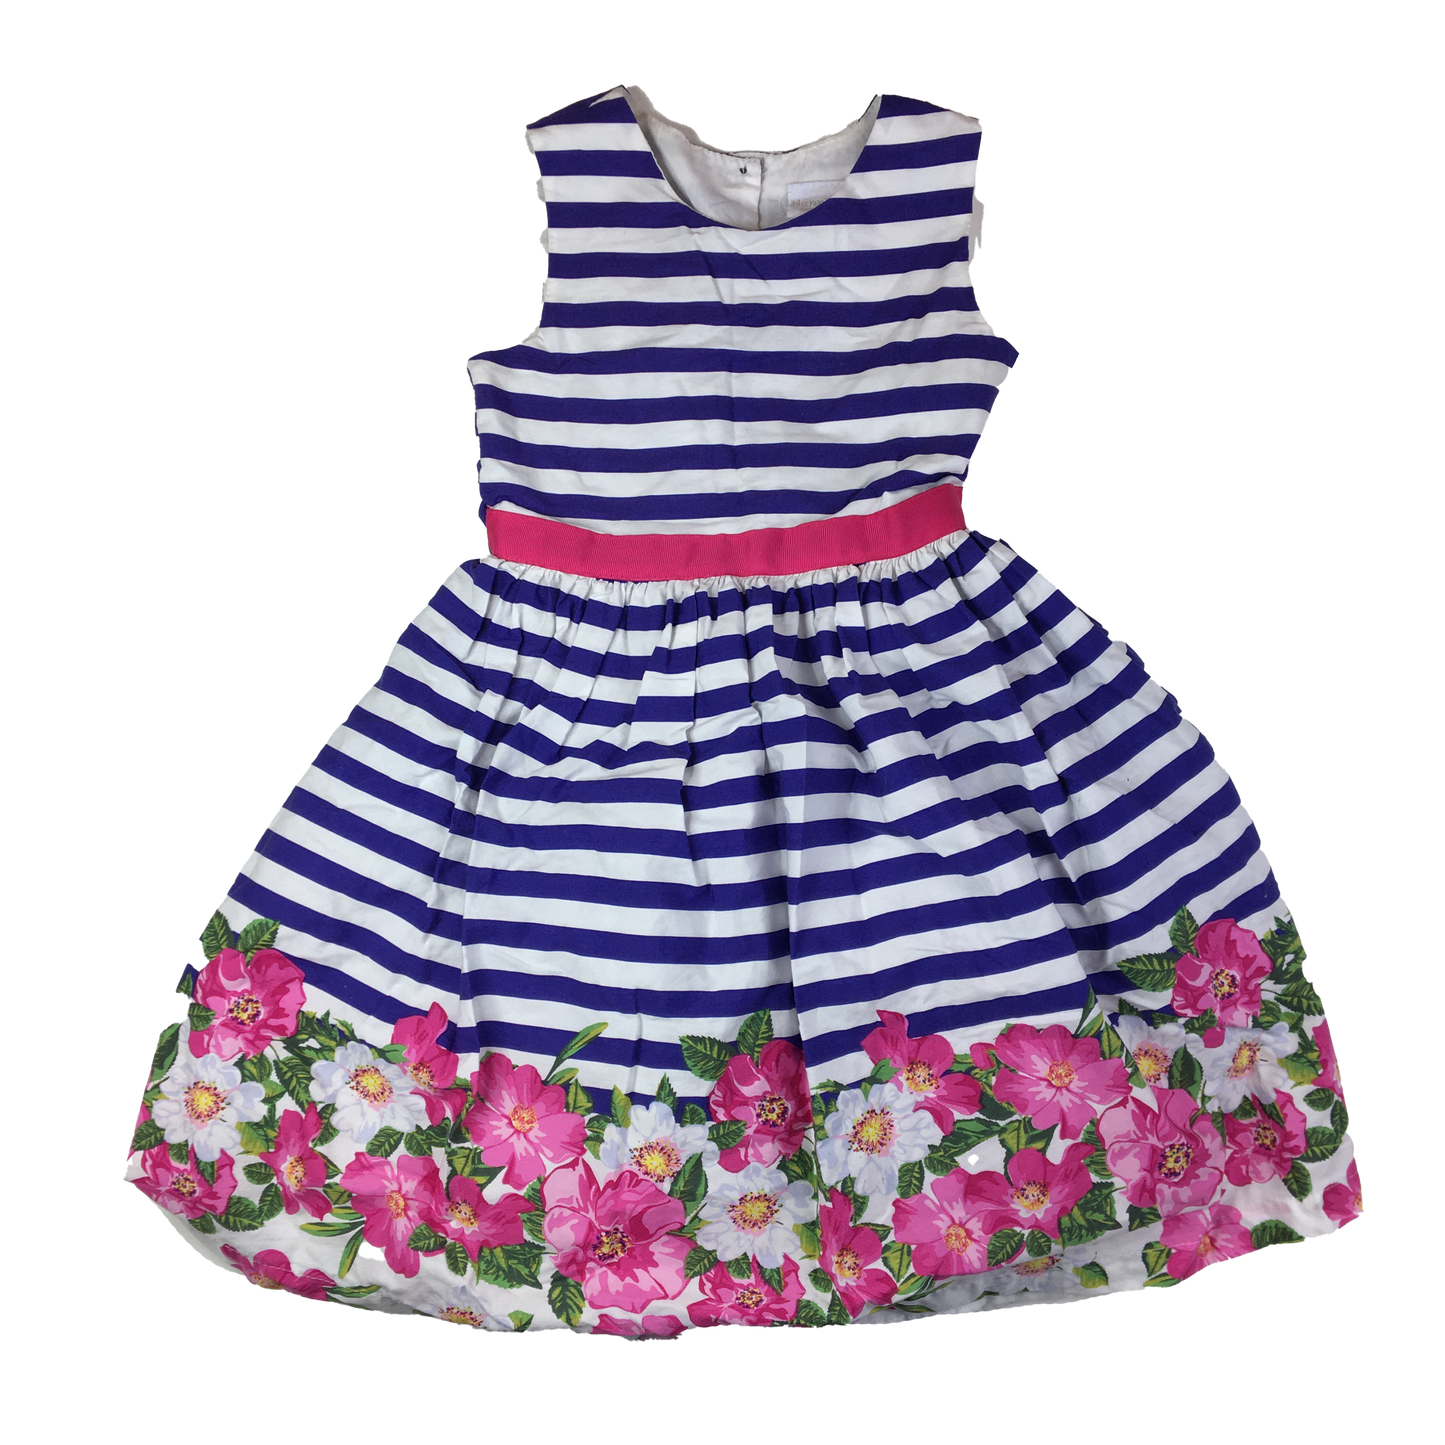 Nannette Couture Blue & White Stripe Dress with Floral Bottom 6X